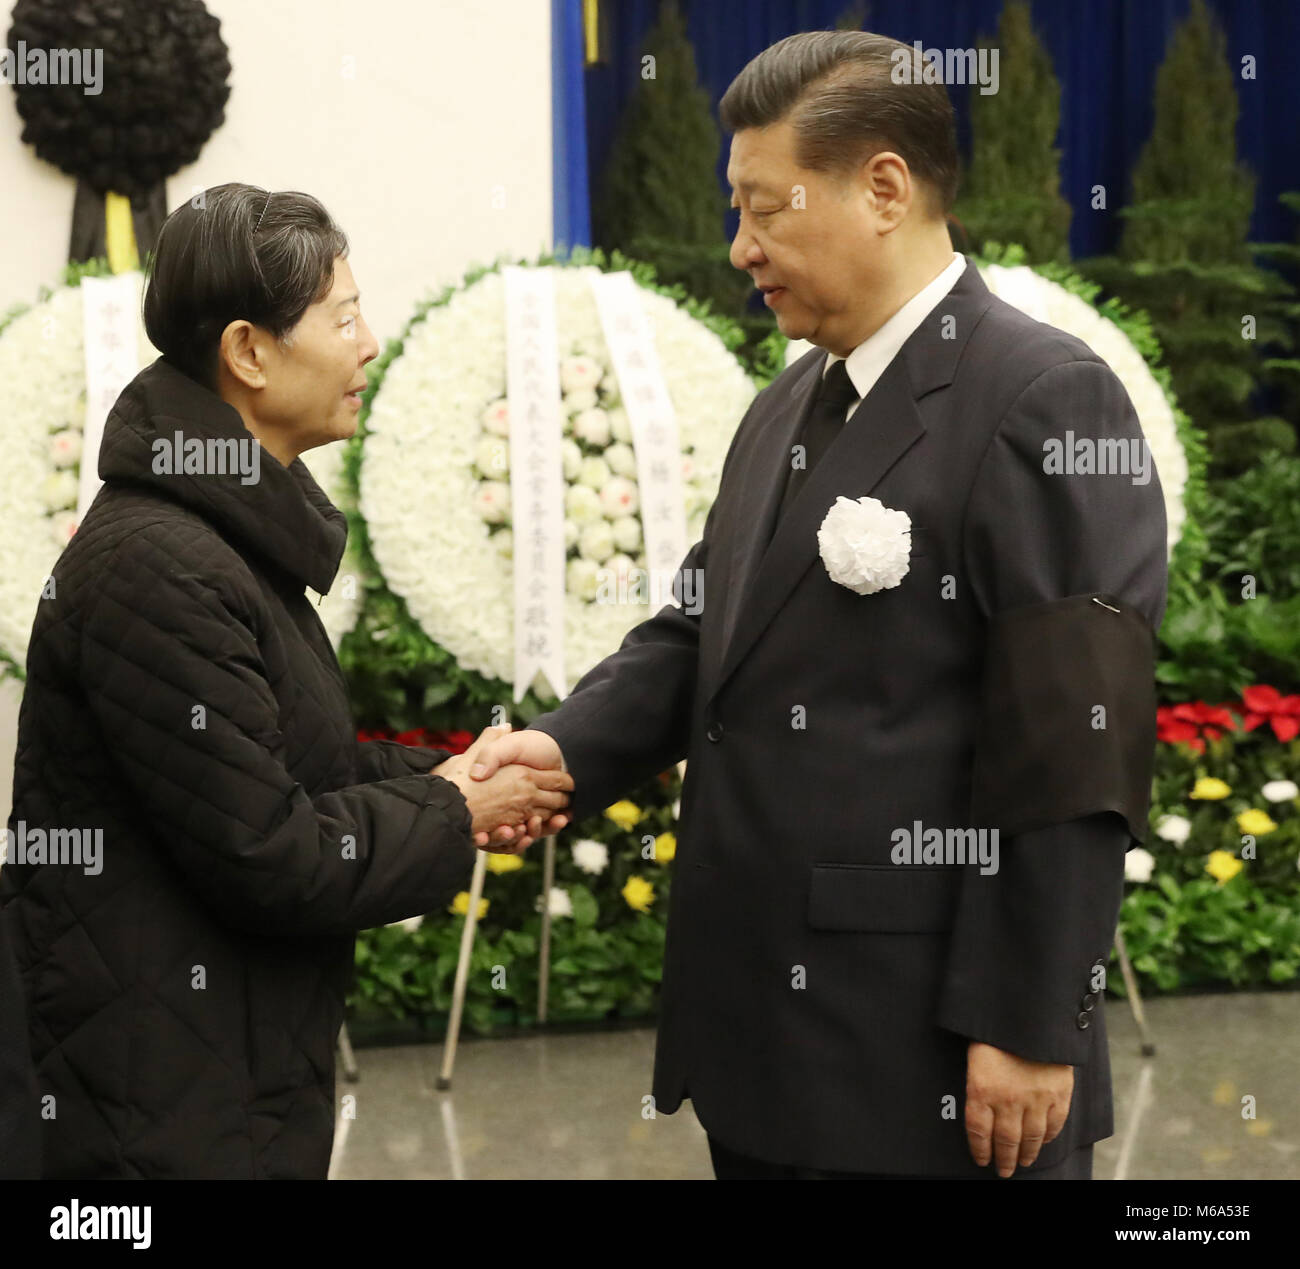 (180302) -- BEIJING, March 2, 2018 (Xinhua) -- Chinese President Xi Jinping (R) shakes hands with a family member of Yang Rudai, former member of the Political Bureau of the Central Committee of the Communist Party of China (CPC), at the funeral of Yang at the Babaoshan Revolutionary Cemetery in Beijing, capital of China, March 2, 2018. Yang passed away due to illness at the age of 92 in Beijing on Feb. 24. Yang was also former vice chairman of the National Committee of the Chinese People's Political Consultative Conference and former secretary of the CPC Sichuan Provincial Committee. (Xinhua/ Stock Photo